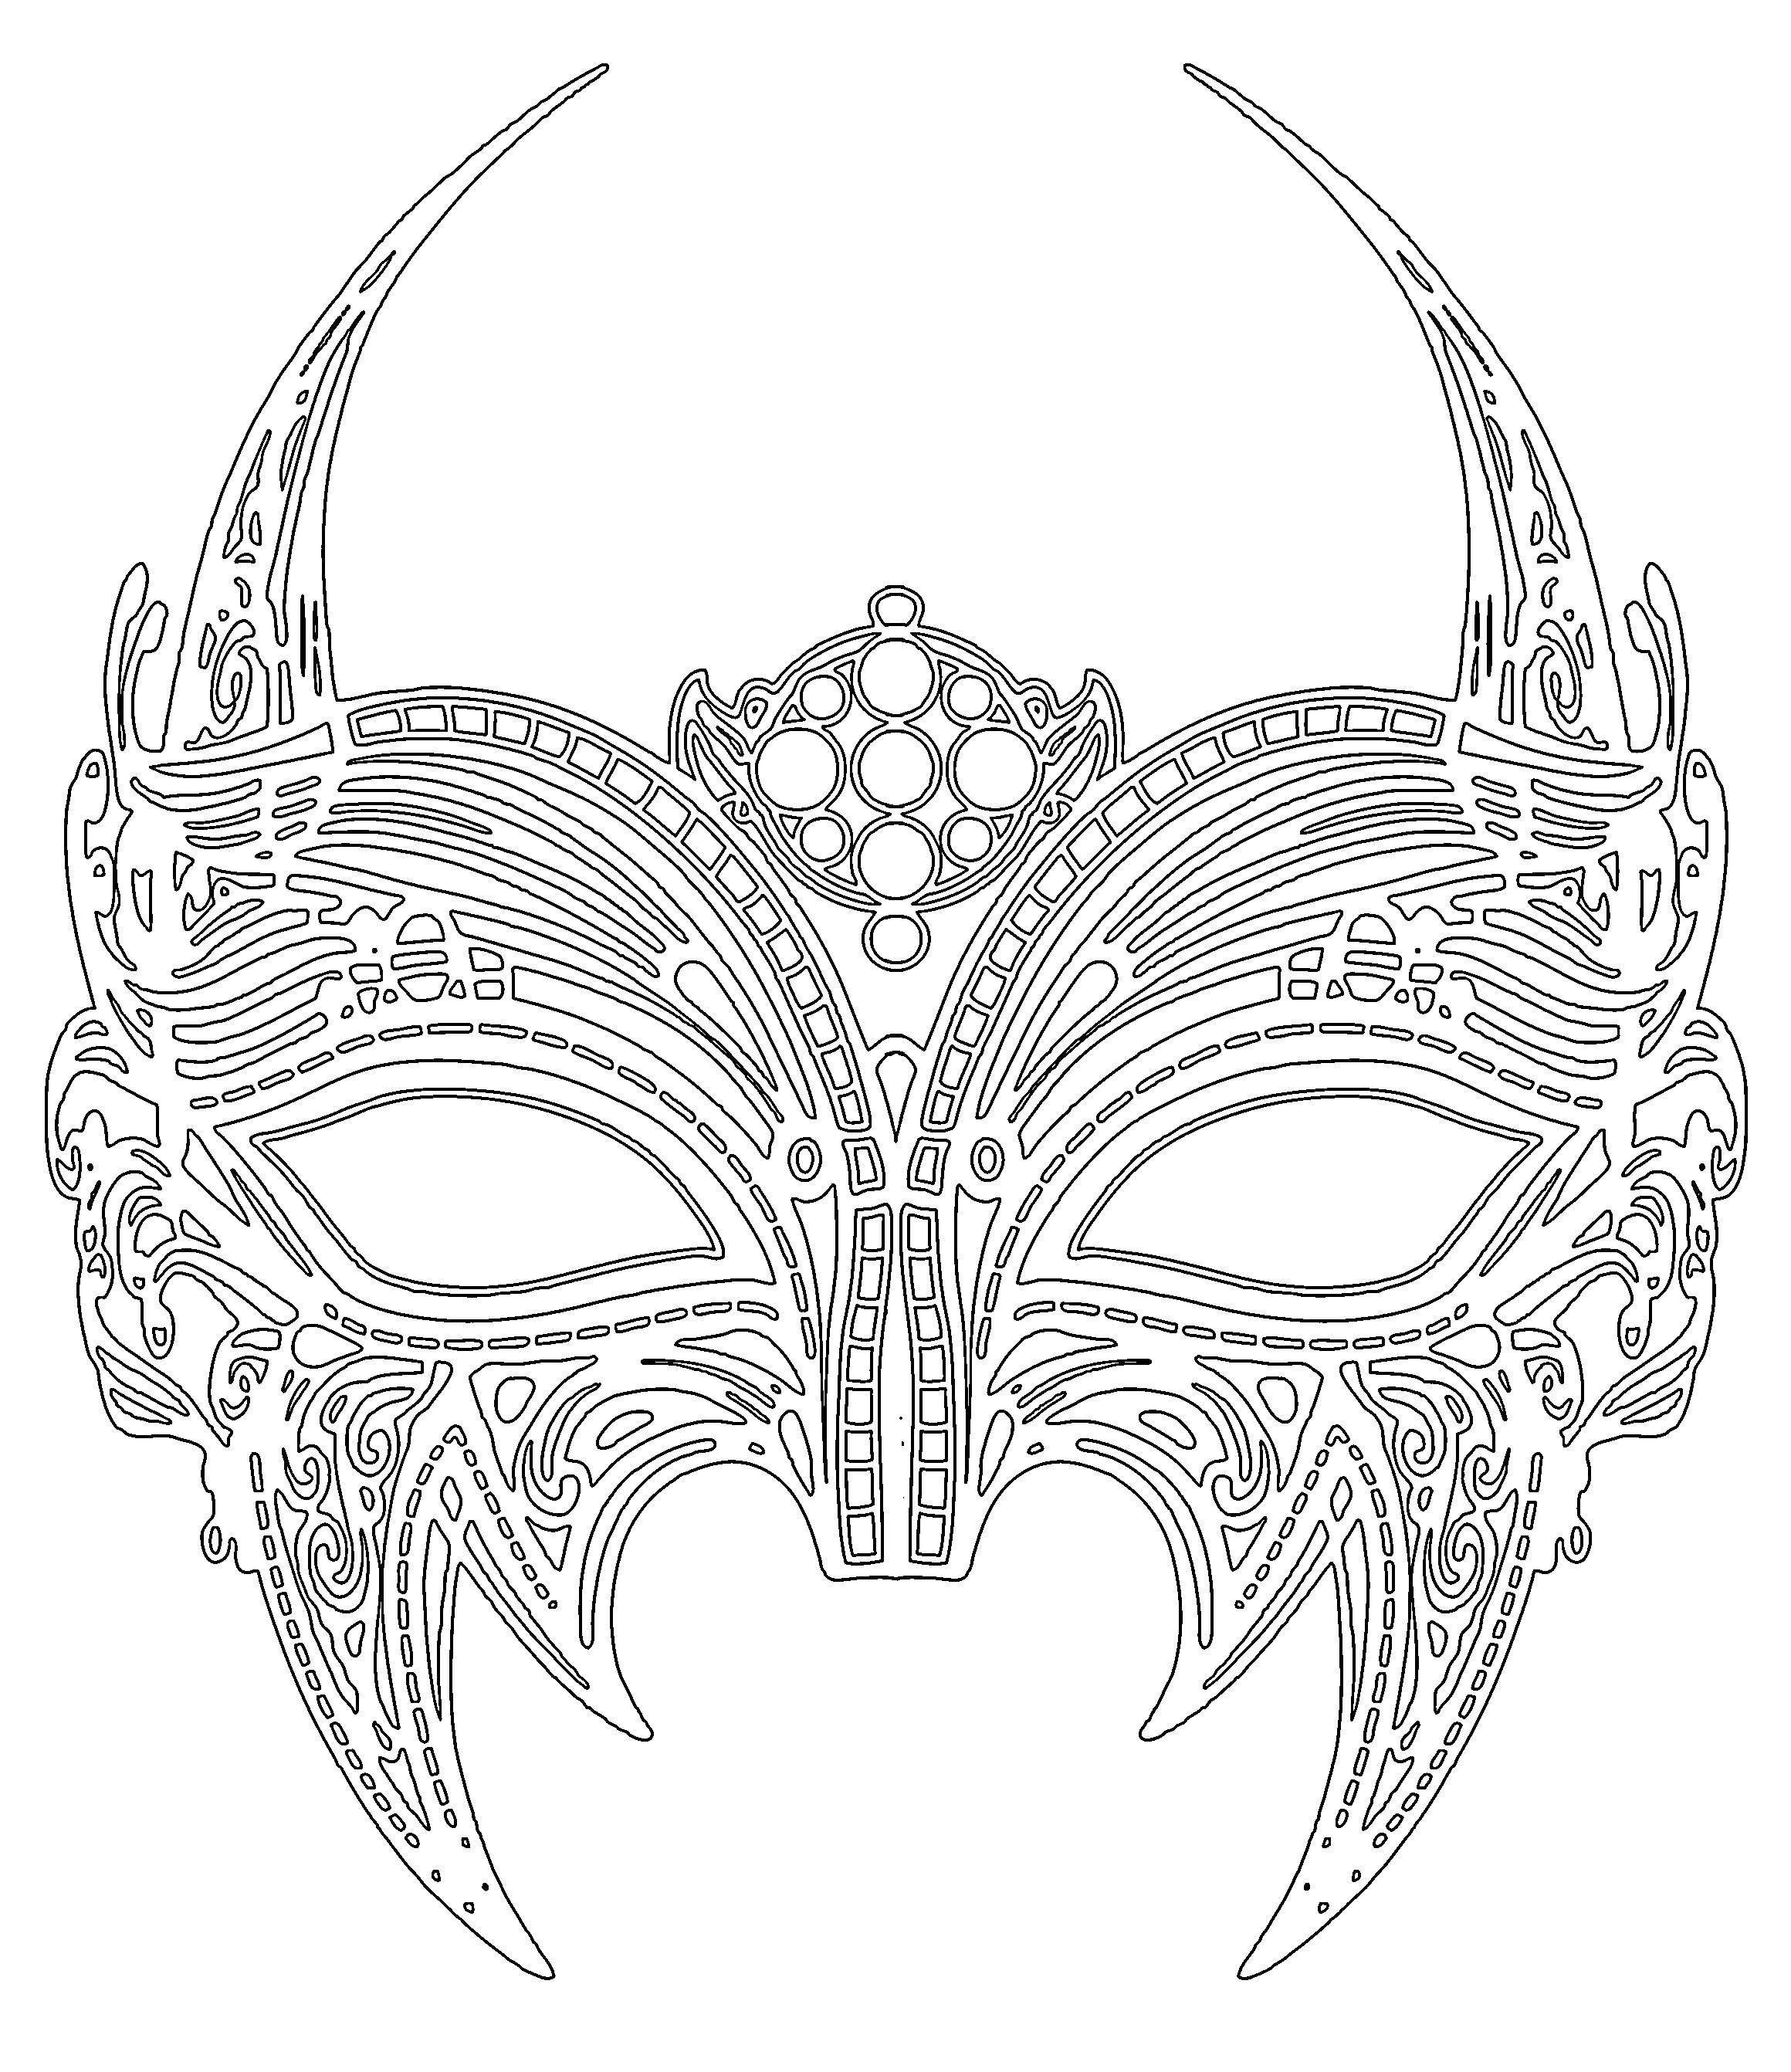 Coloring The mask pattern. Category mask. Tags:  mask patterns .